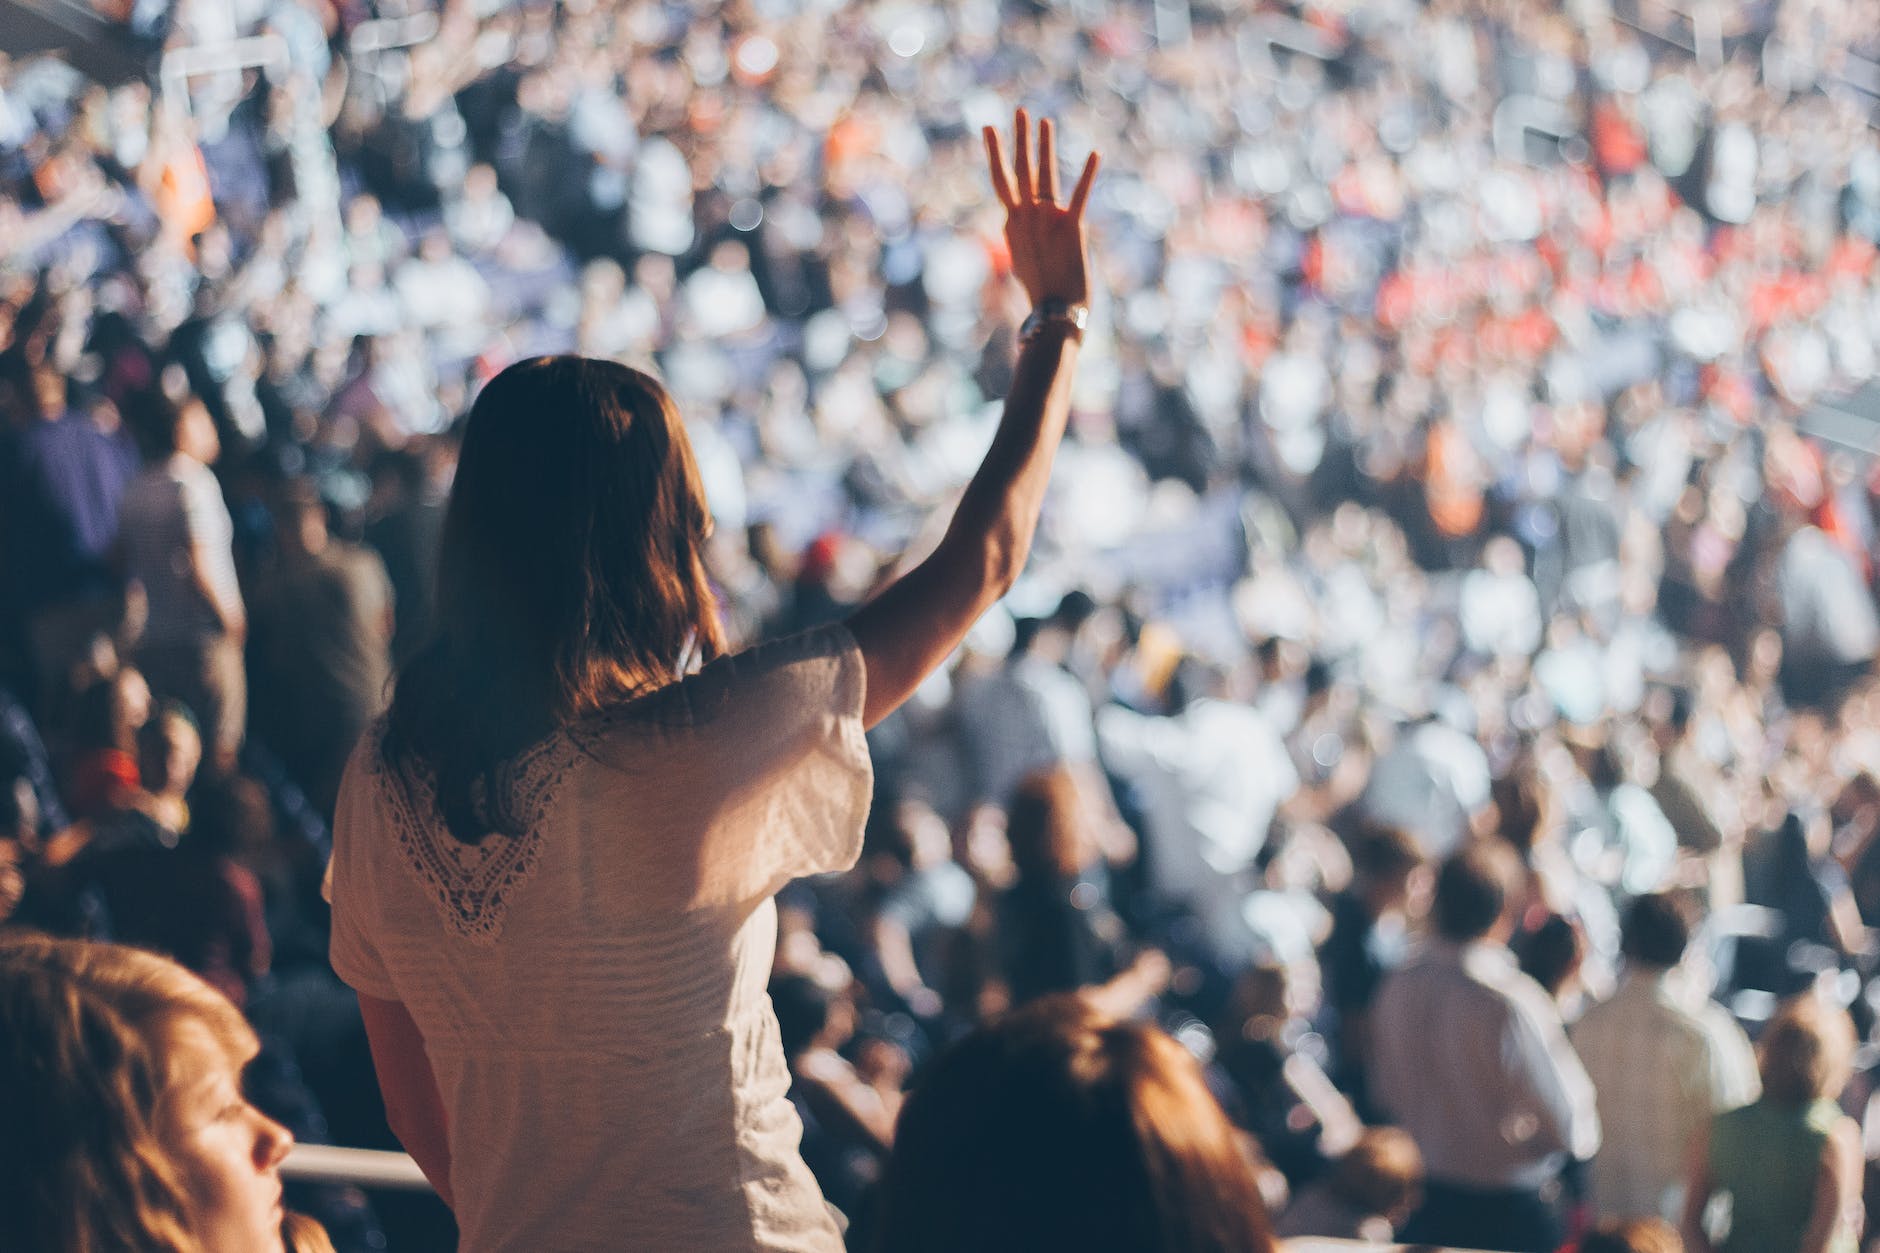 woman with white shirt raising her right hand